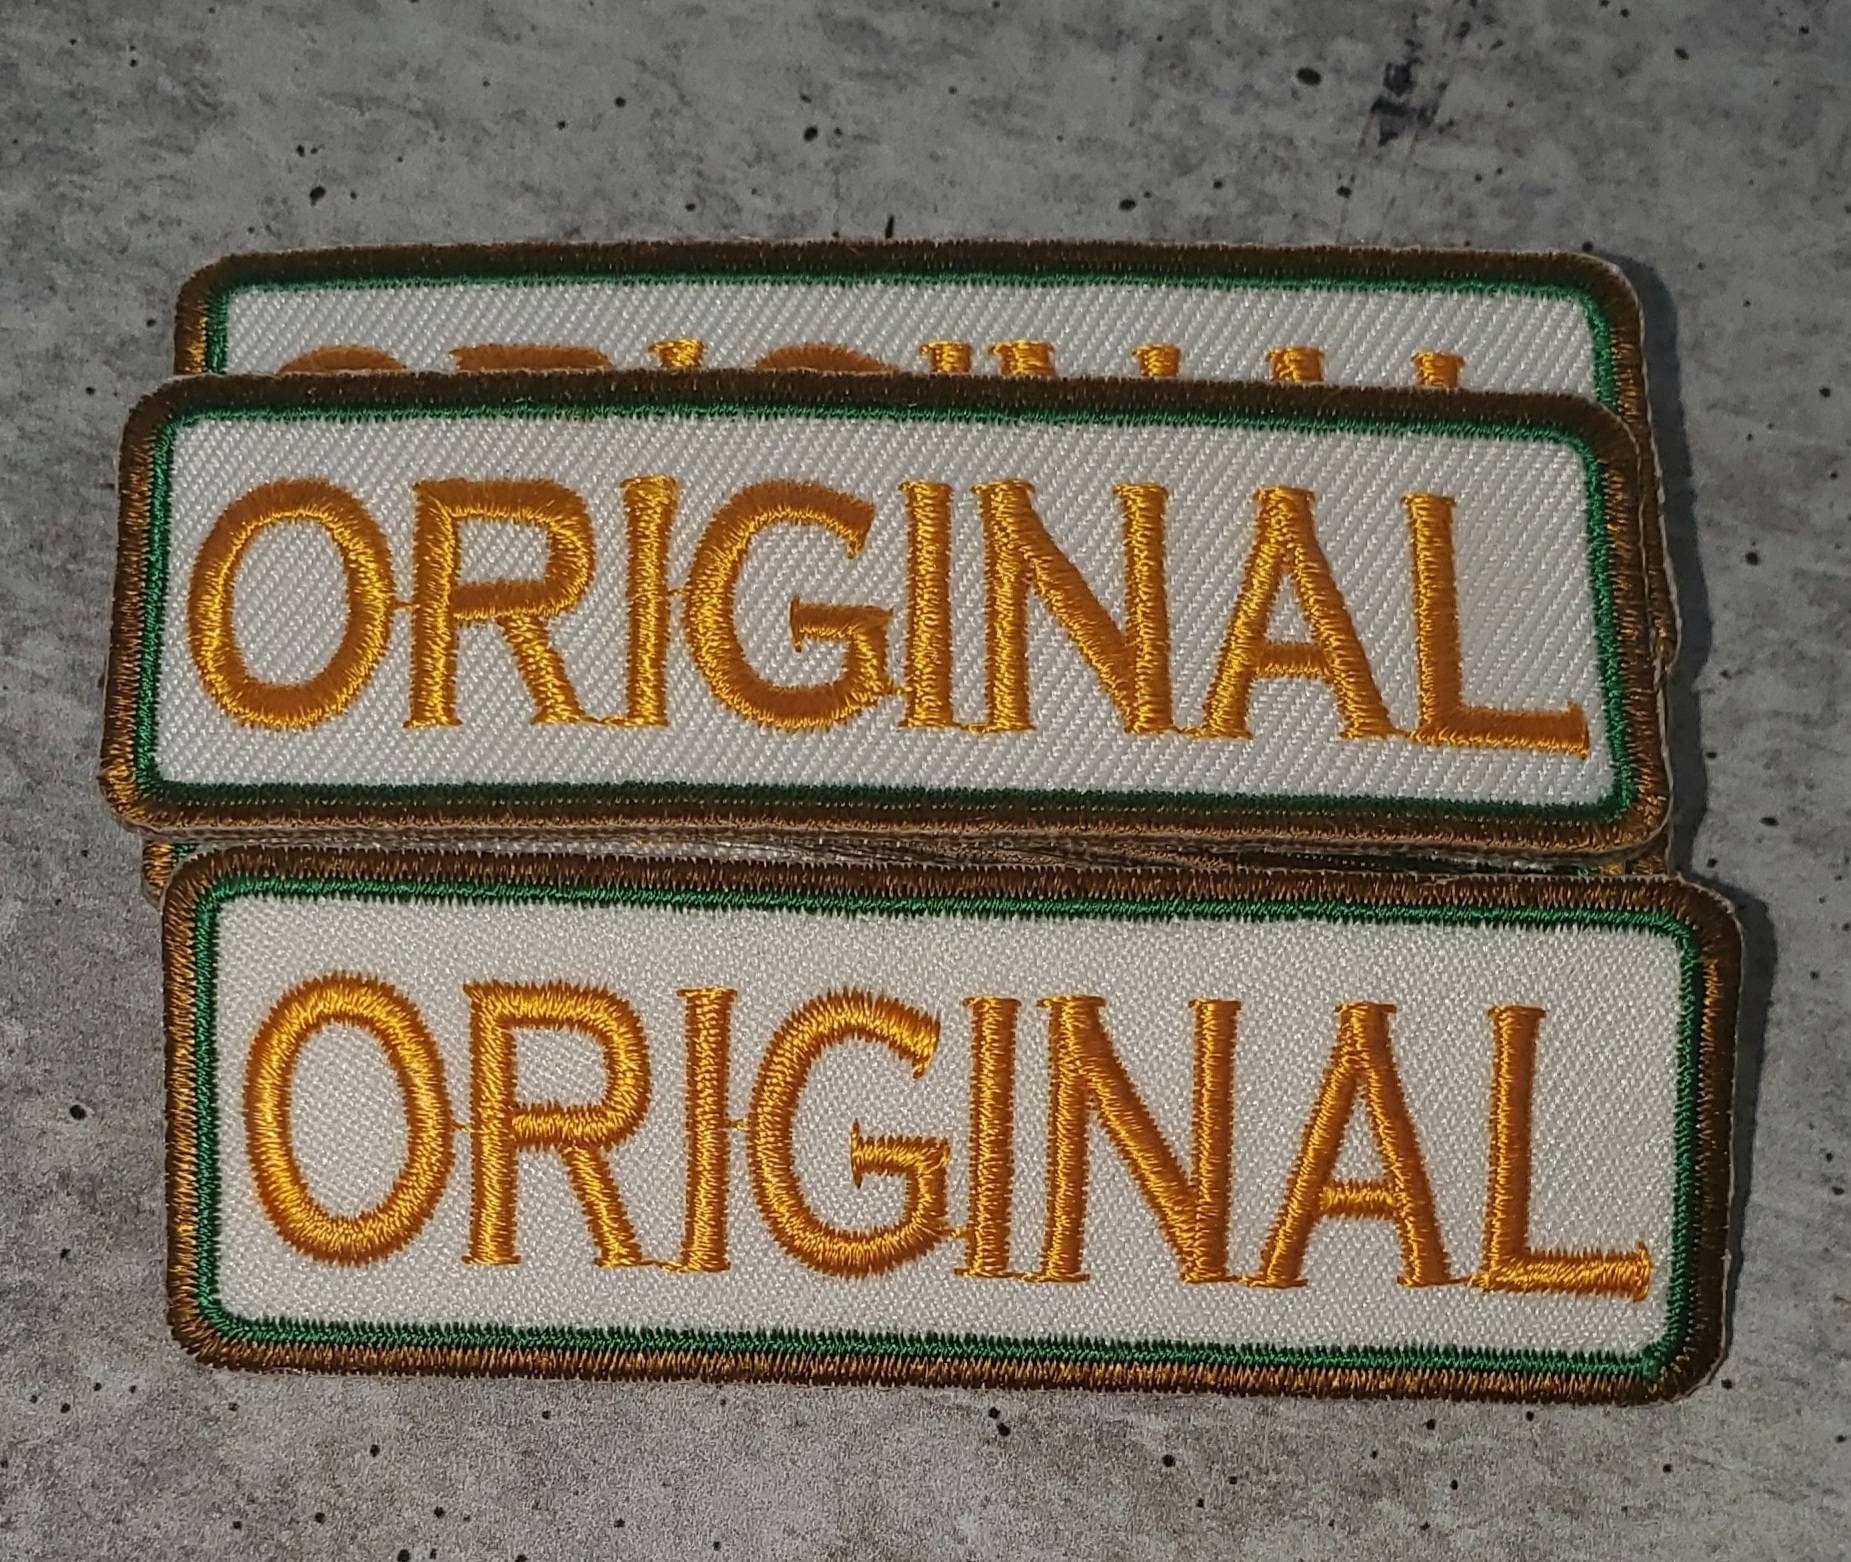 100 Custom Made Embroidered Patches, Embroidery Logo Patch, Clothes Patches,  Emb Patches, Sewed Patches, Patches for Clothes 